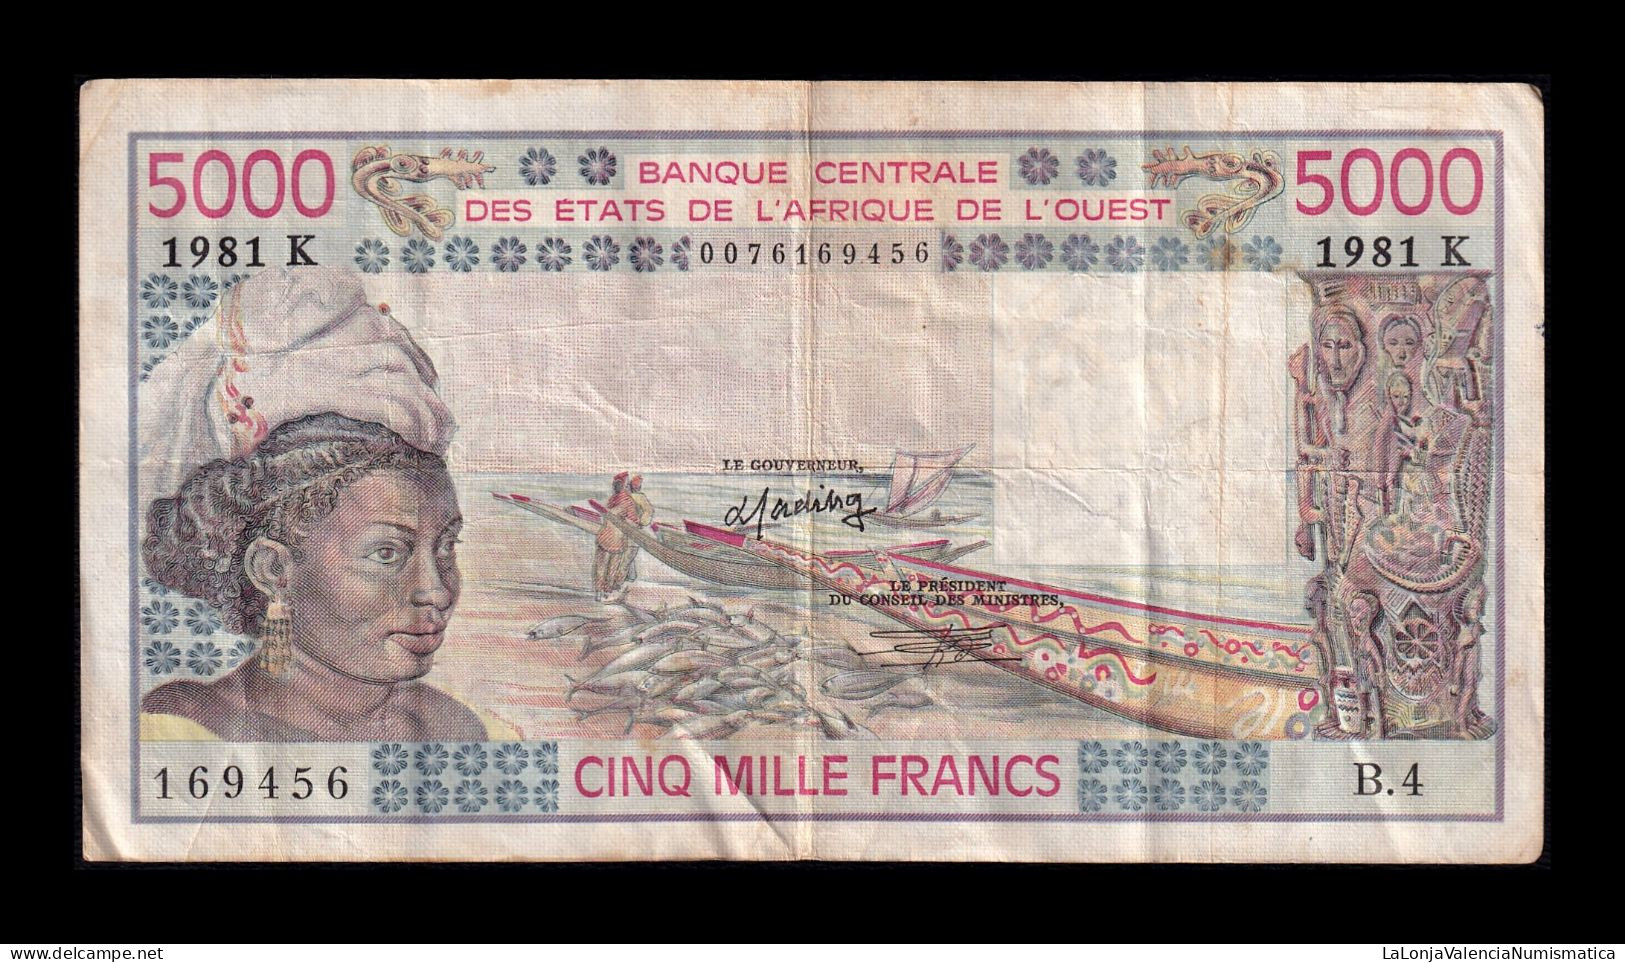 West African St. Senegal 5000 Francs 1981 Pick 708Kf(1) Bc/Mbc F/Vf - West African States